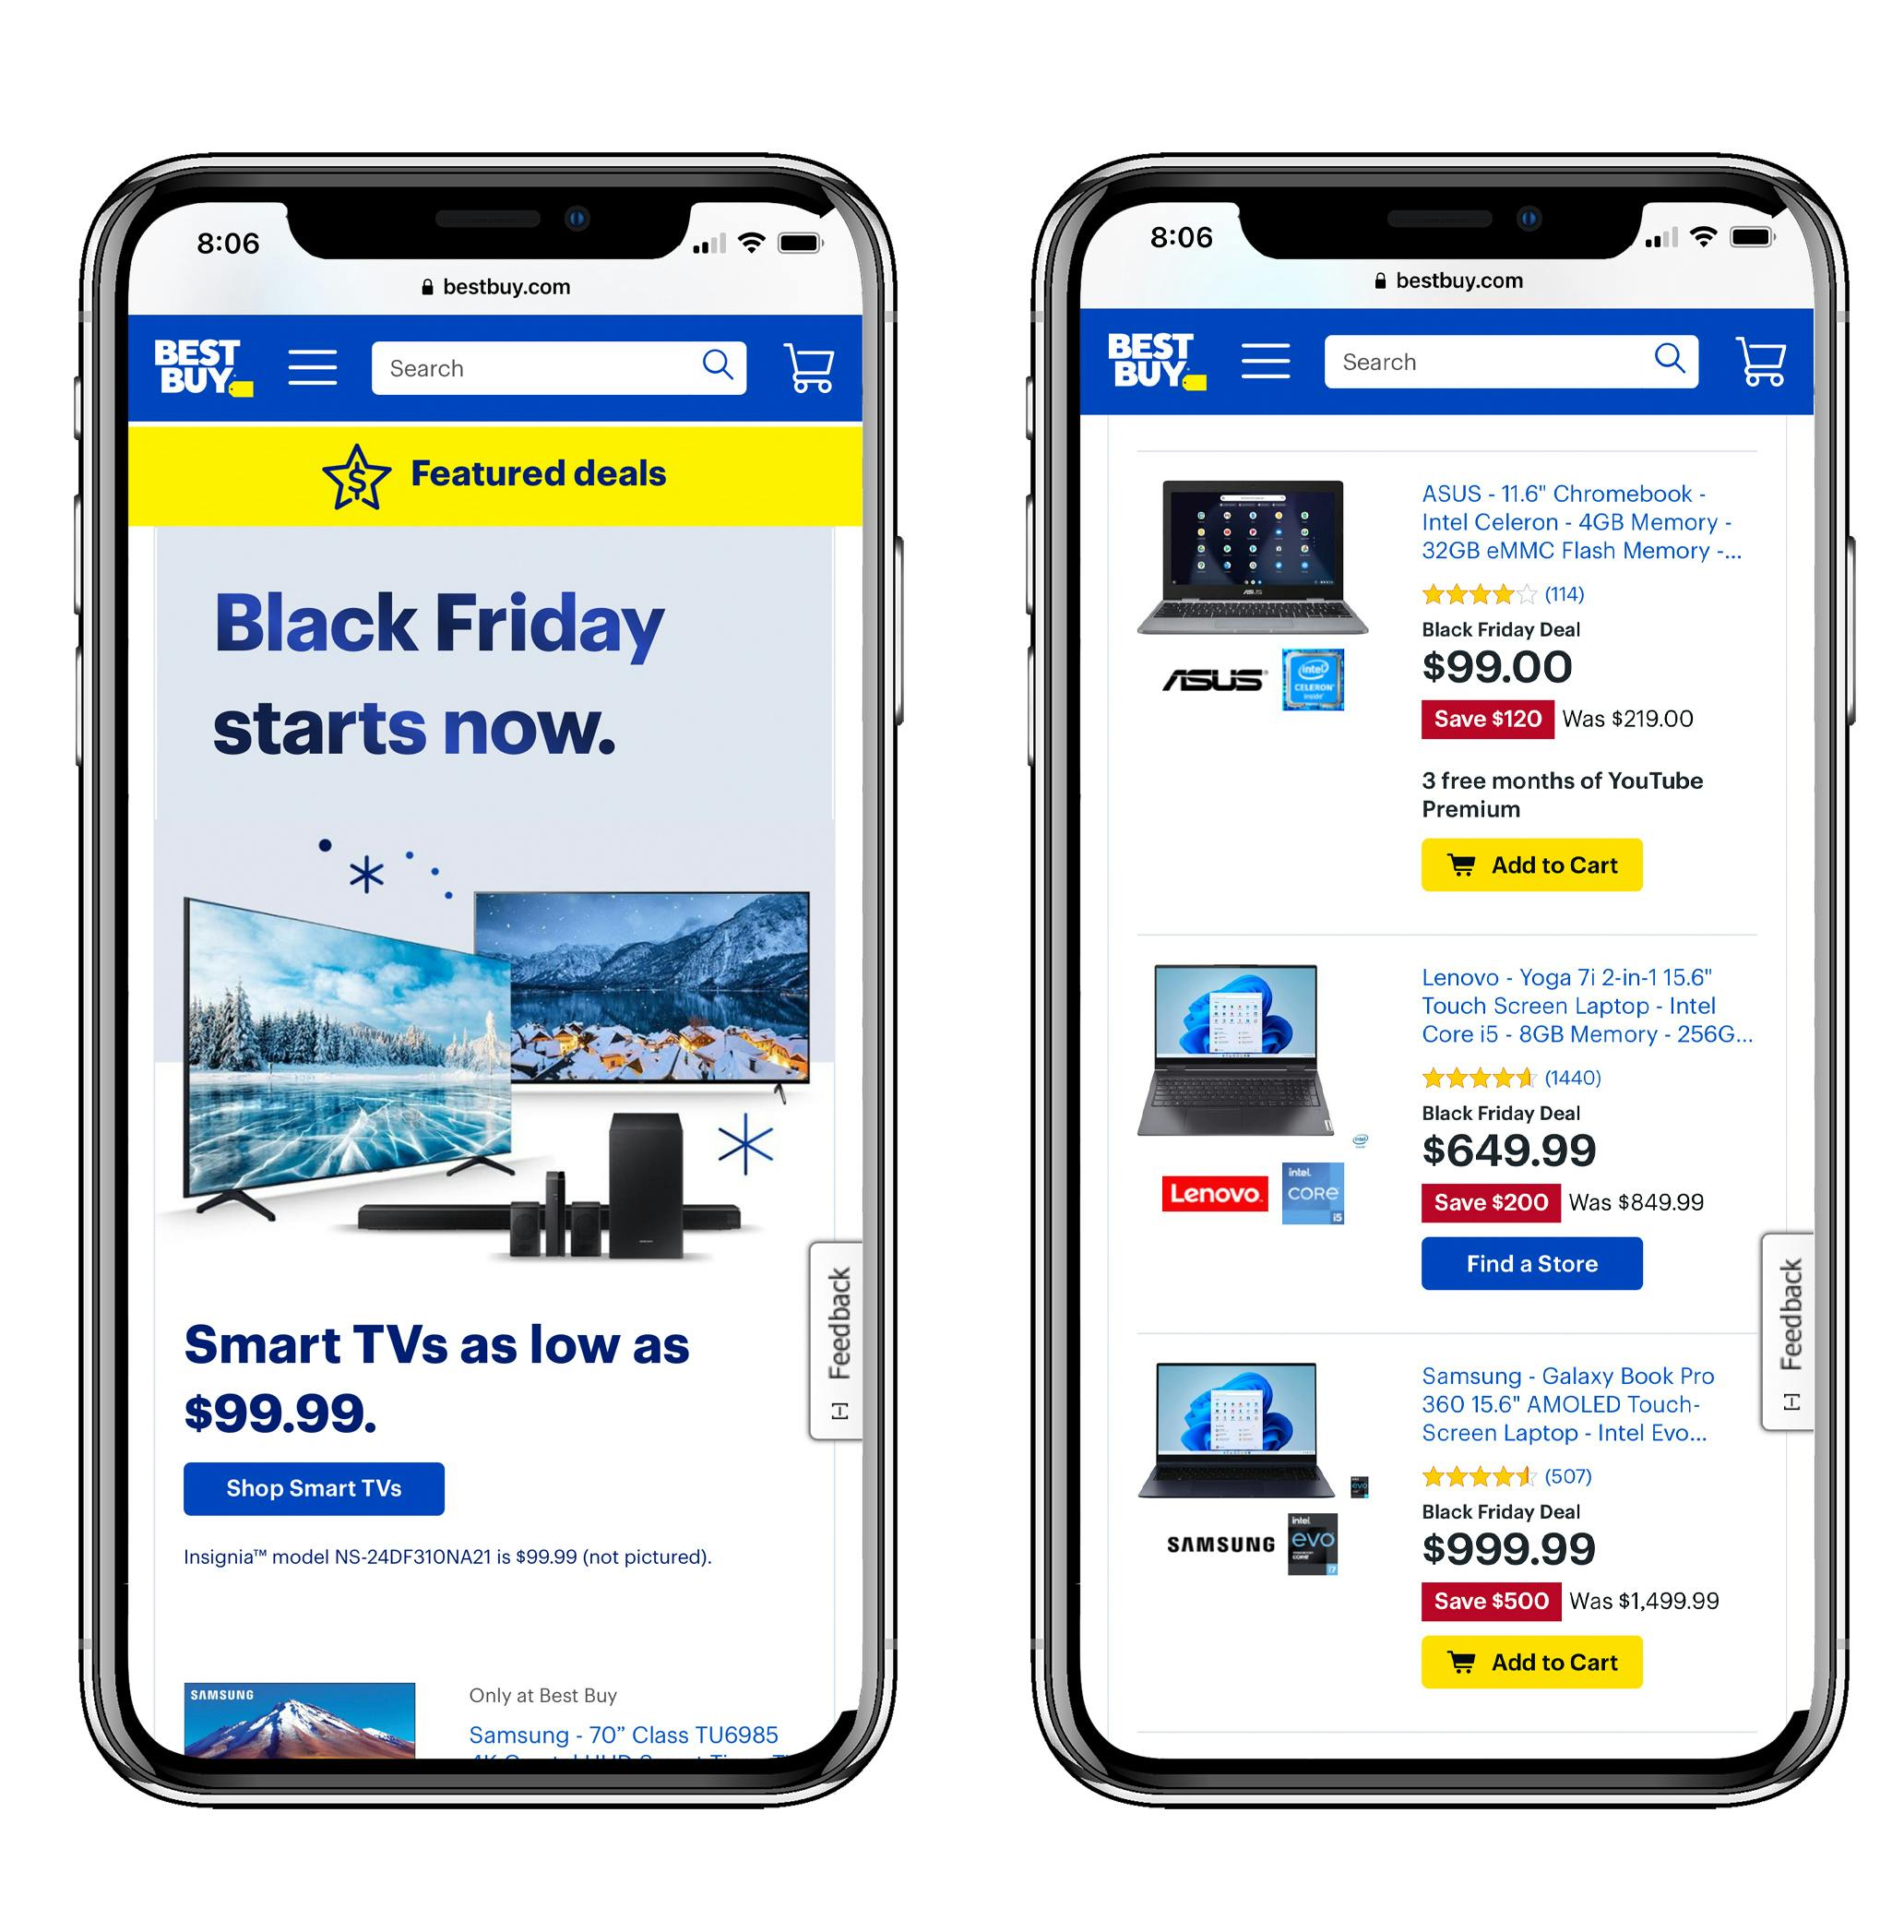 A graphic of two iphones showing the Best Buy Black Friday deals page, and products on sale.